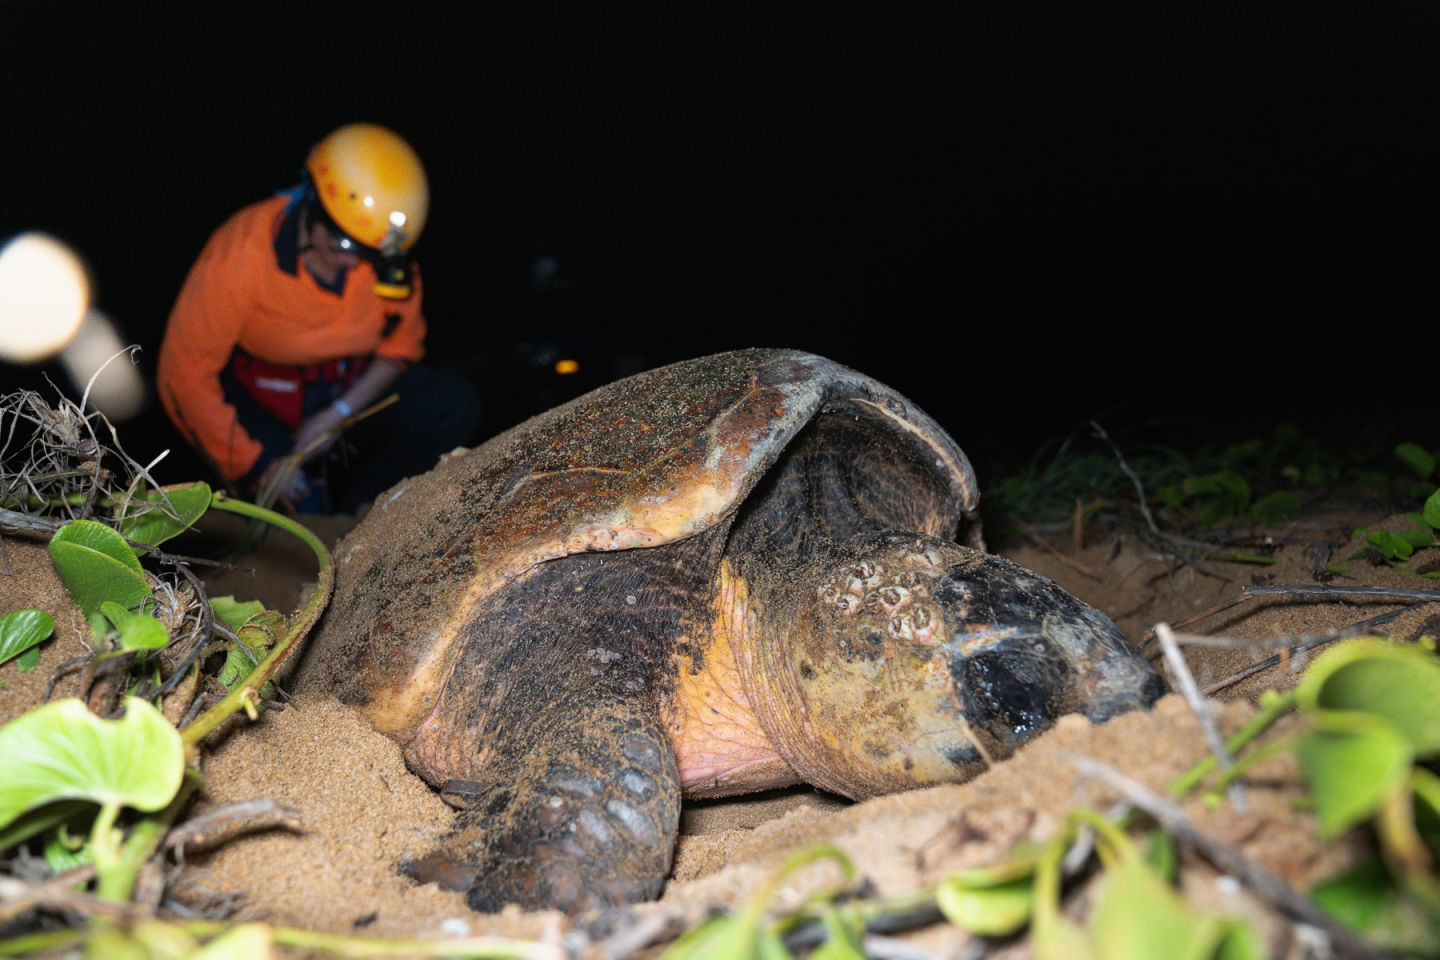 Nev and Bev collect valuable data while a loggerhead turtle is nesting. Credit: Ben and Di